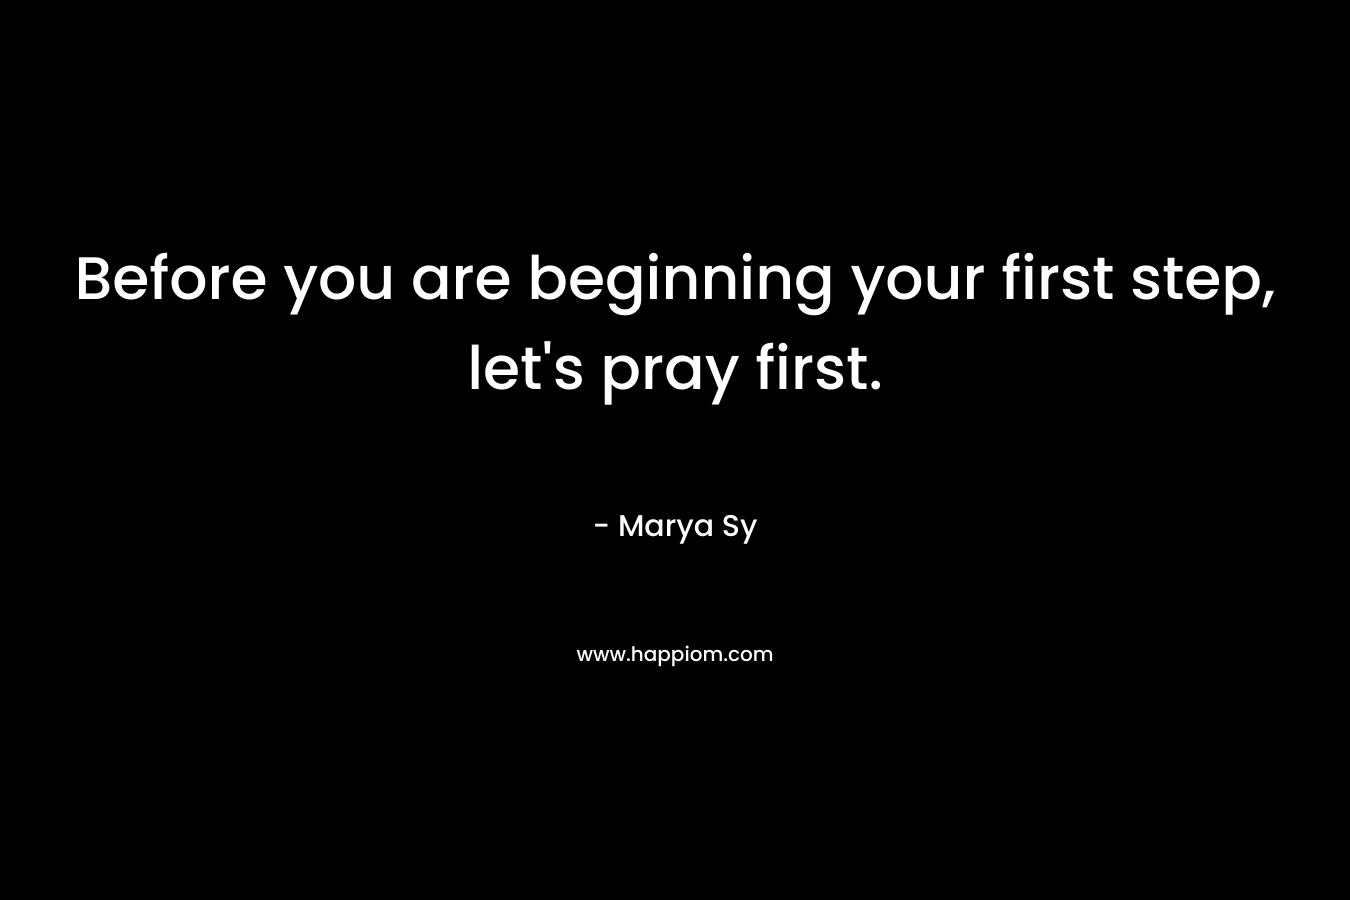 Before you are beginning your first step, let's pray first.